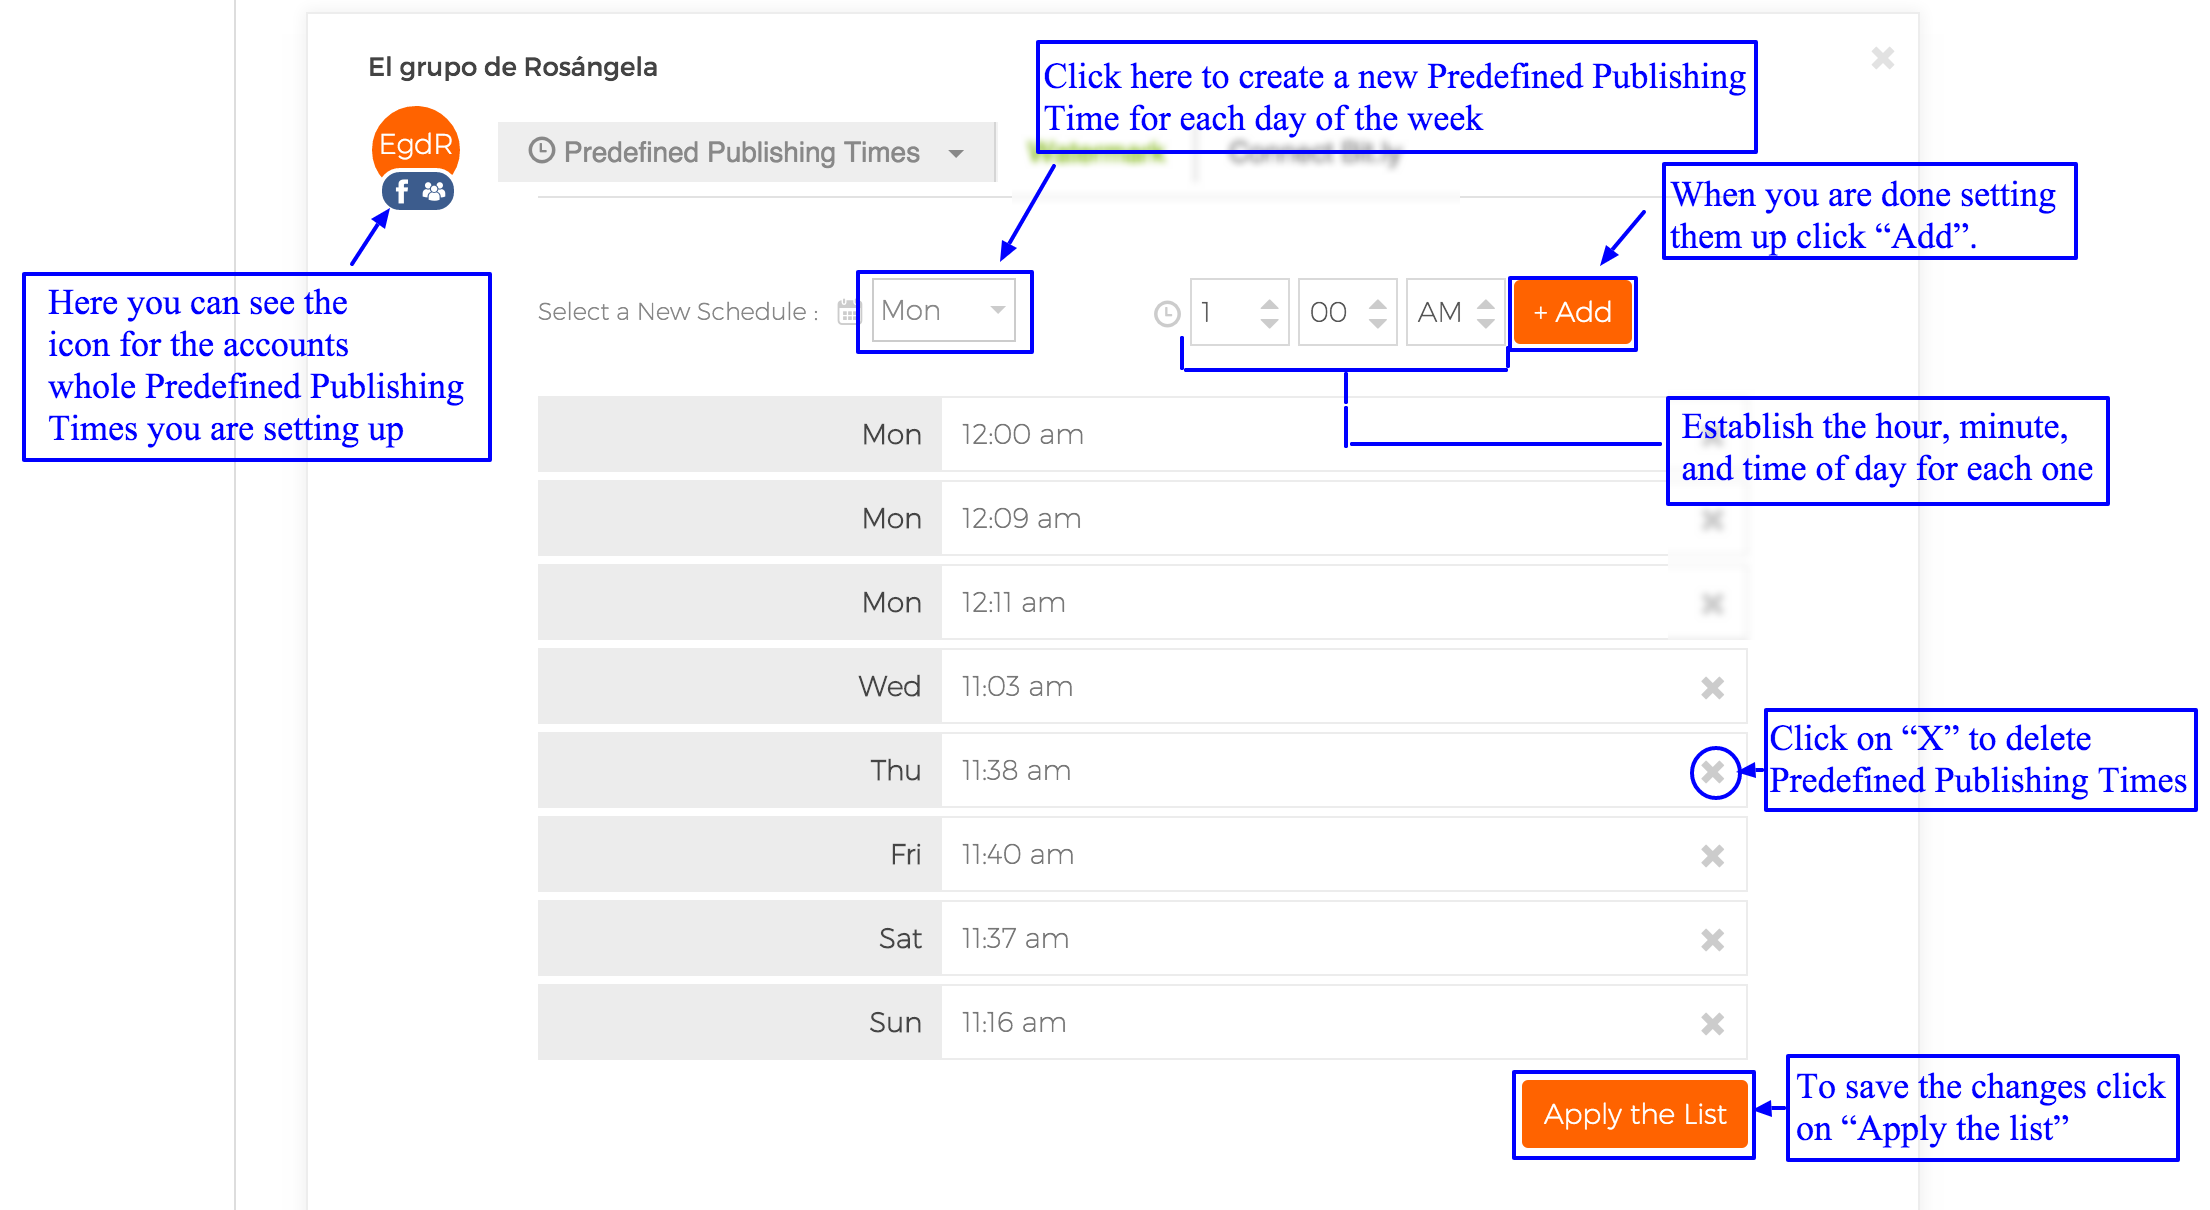 How to set up Predefined Publishing Times on your Postcron account